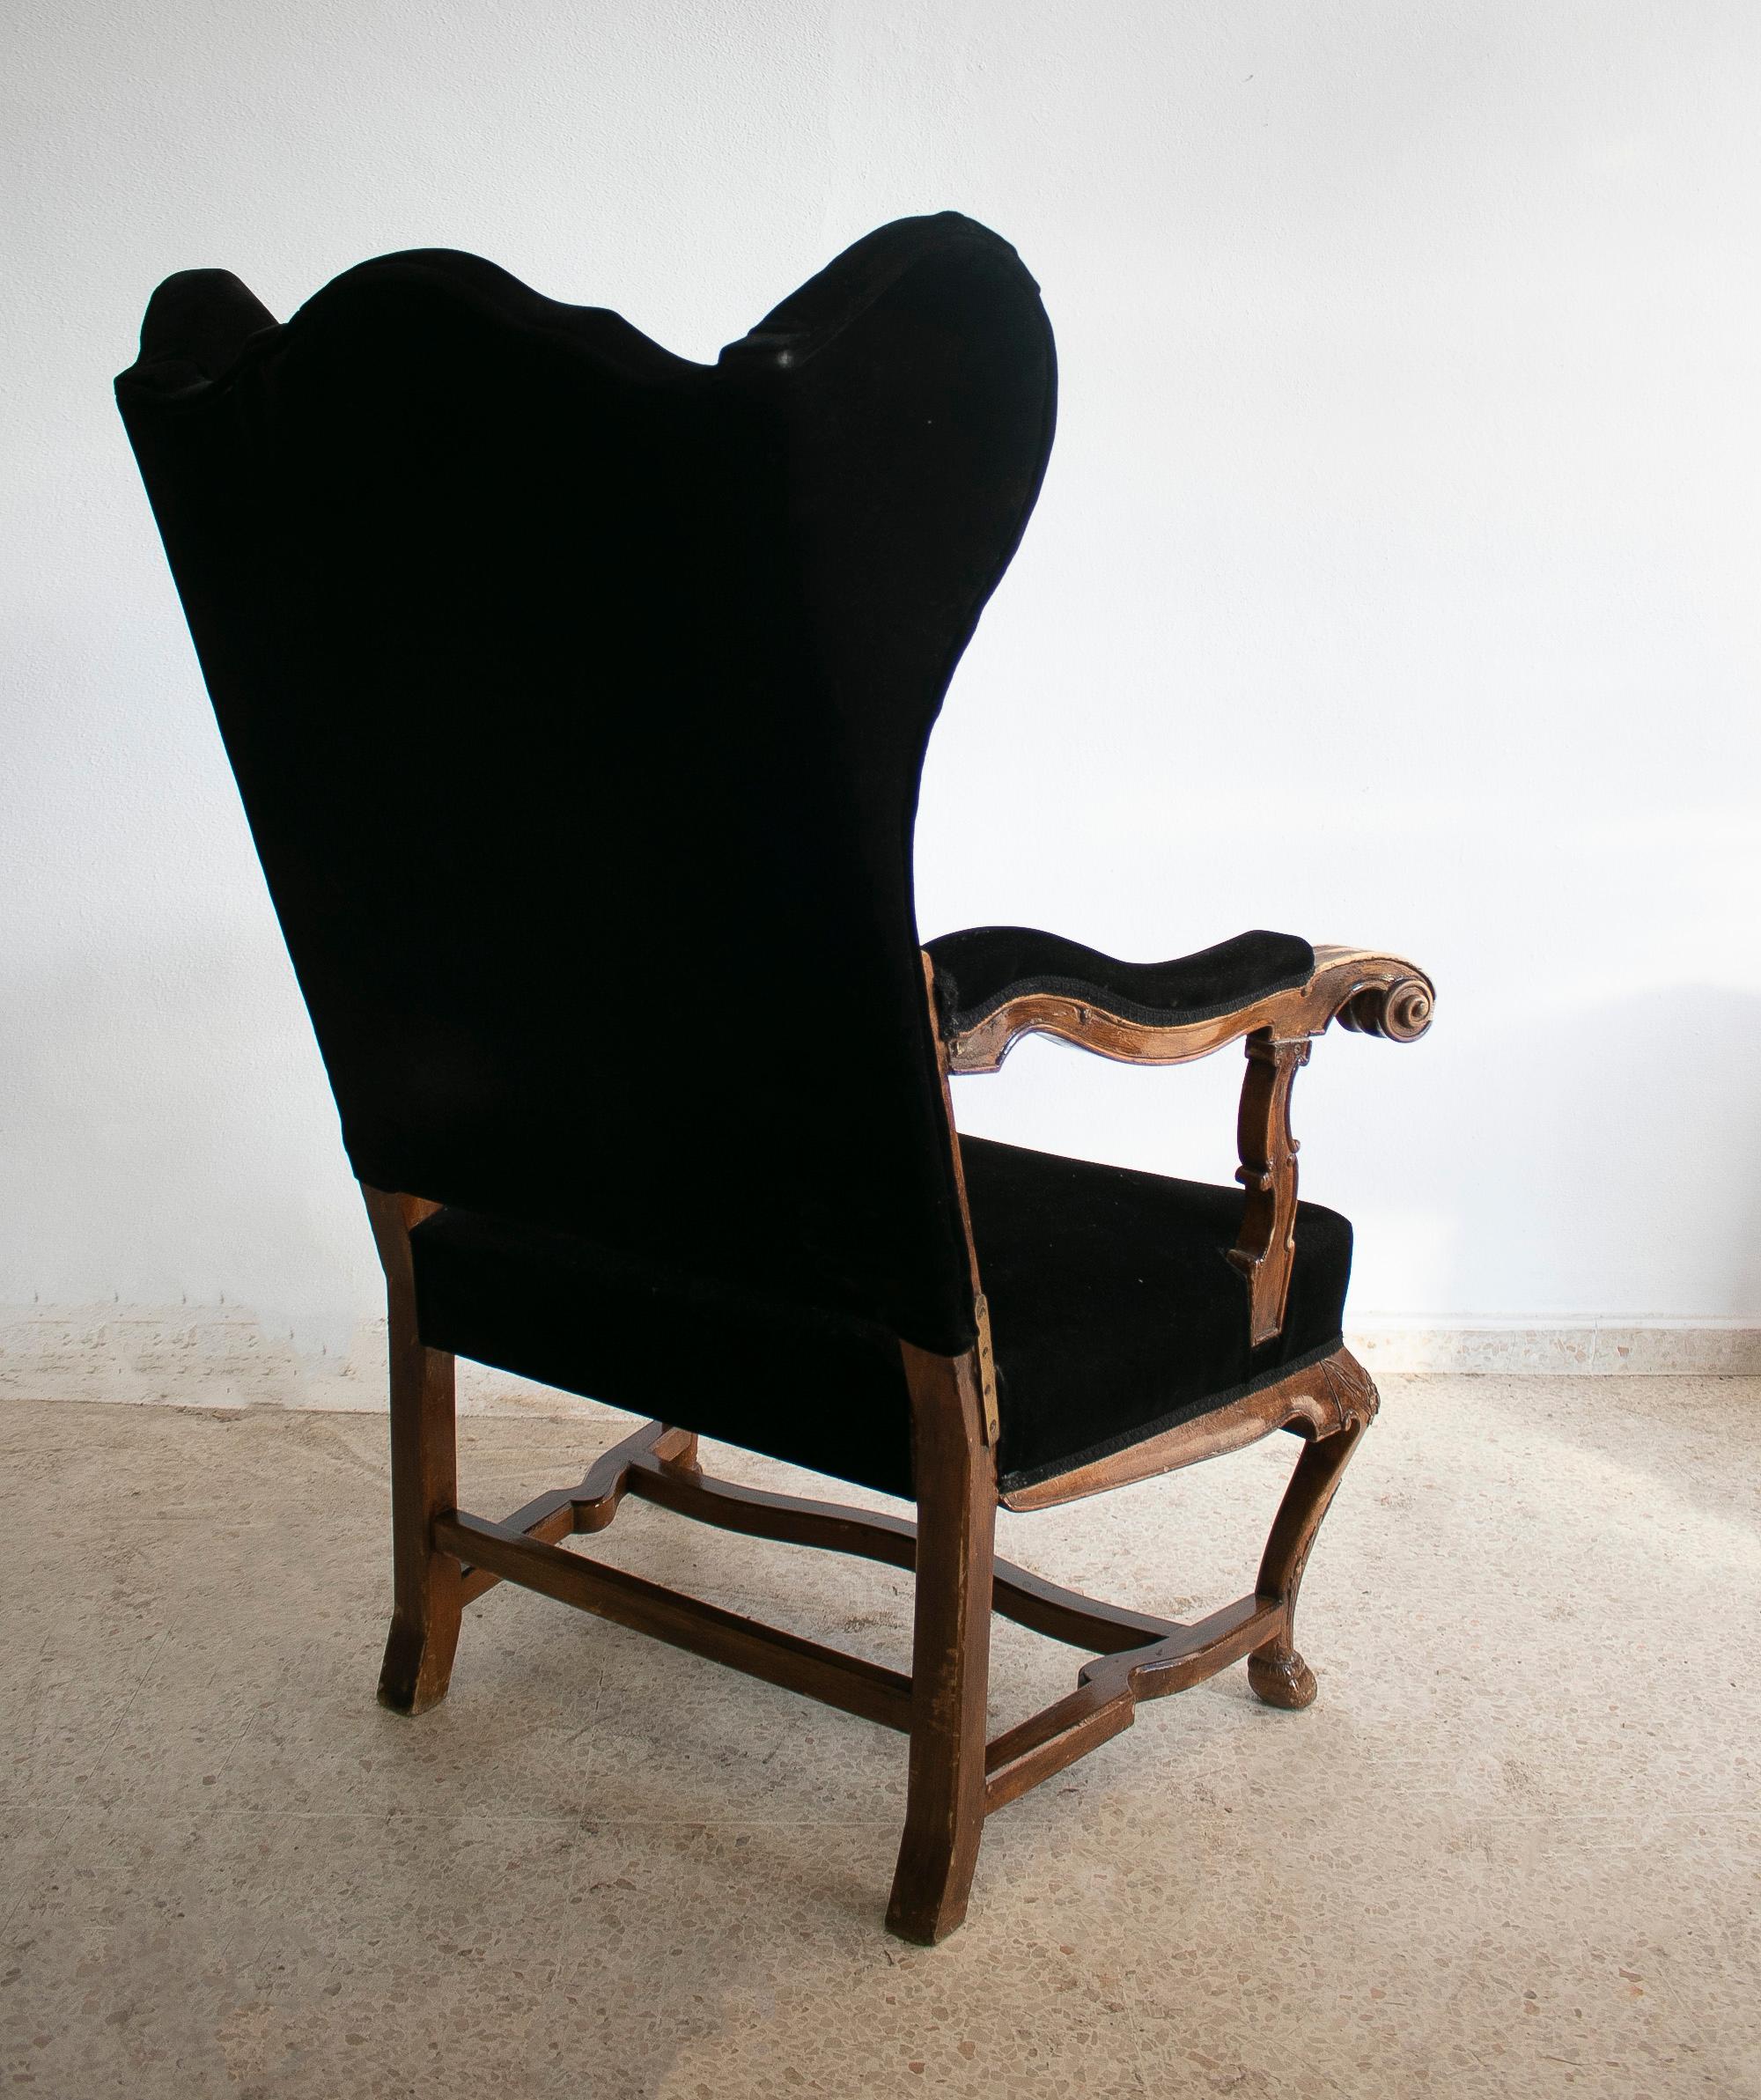 19th Century English Wooden Winged Armchair w/ Velvet Upholstery For Sale 4